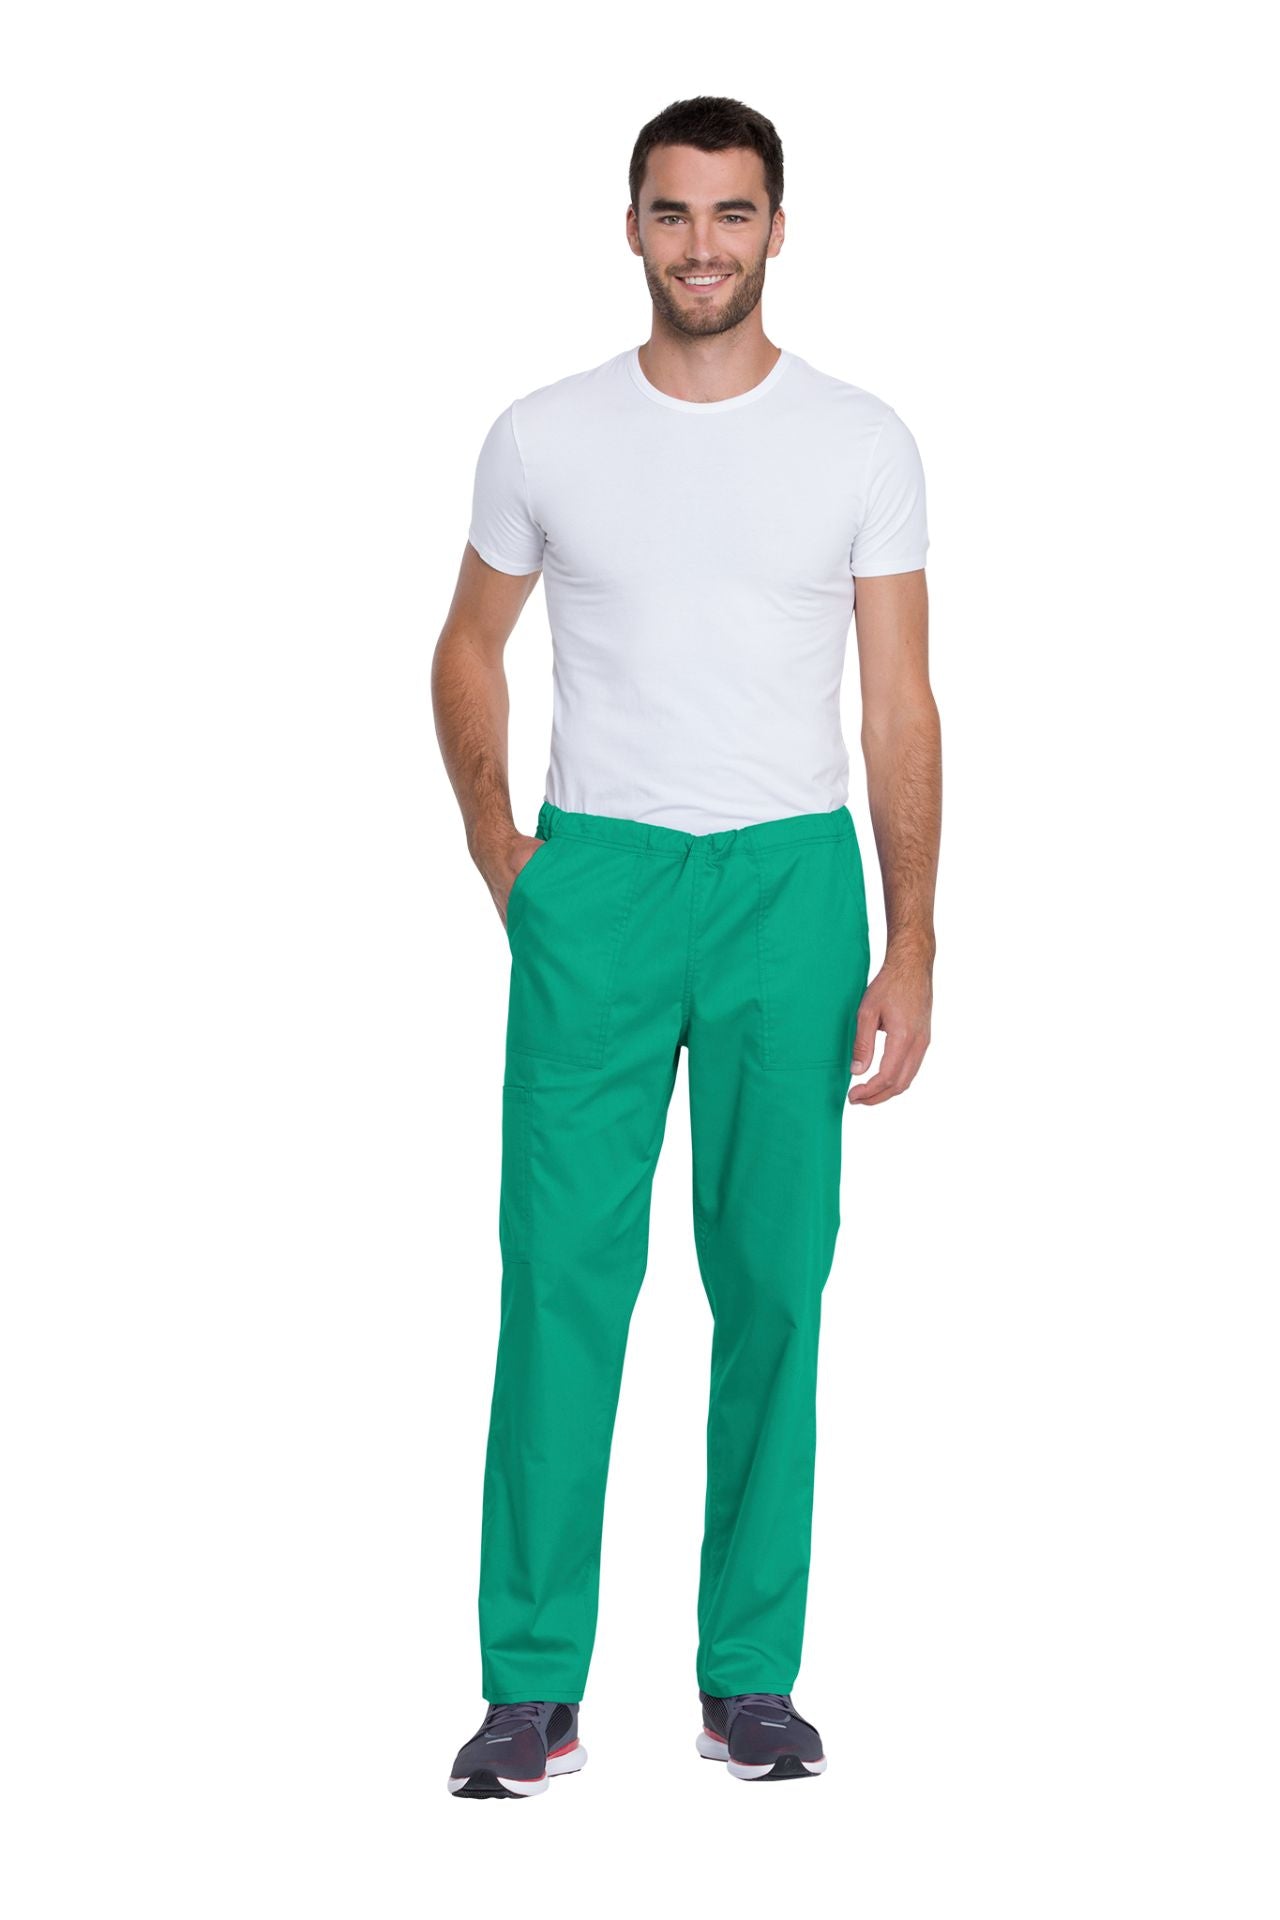 Surgical Green - Genuine Dickies Industrial Strength Unisex Mid Rise Drawstring Pant